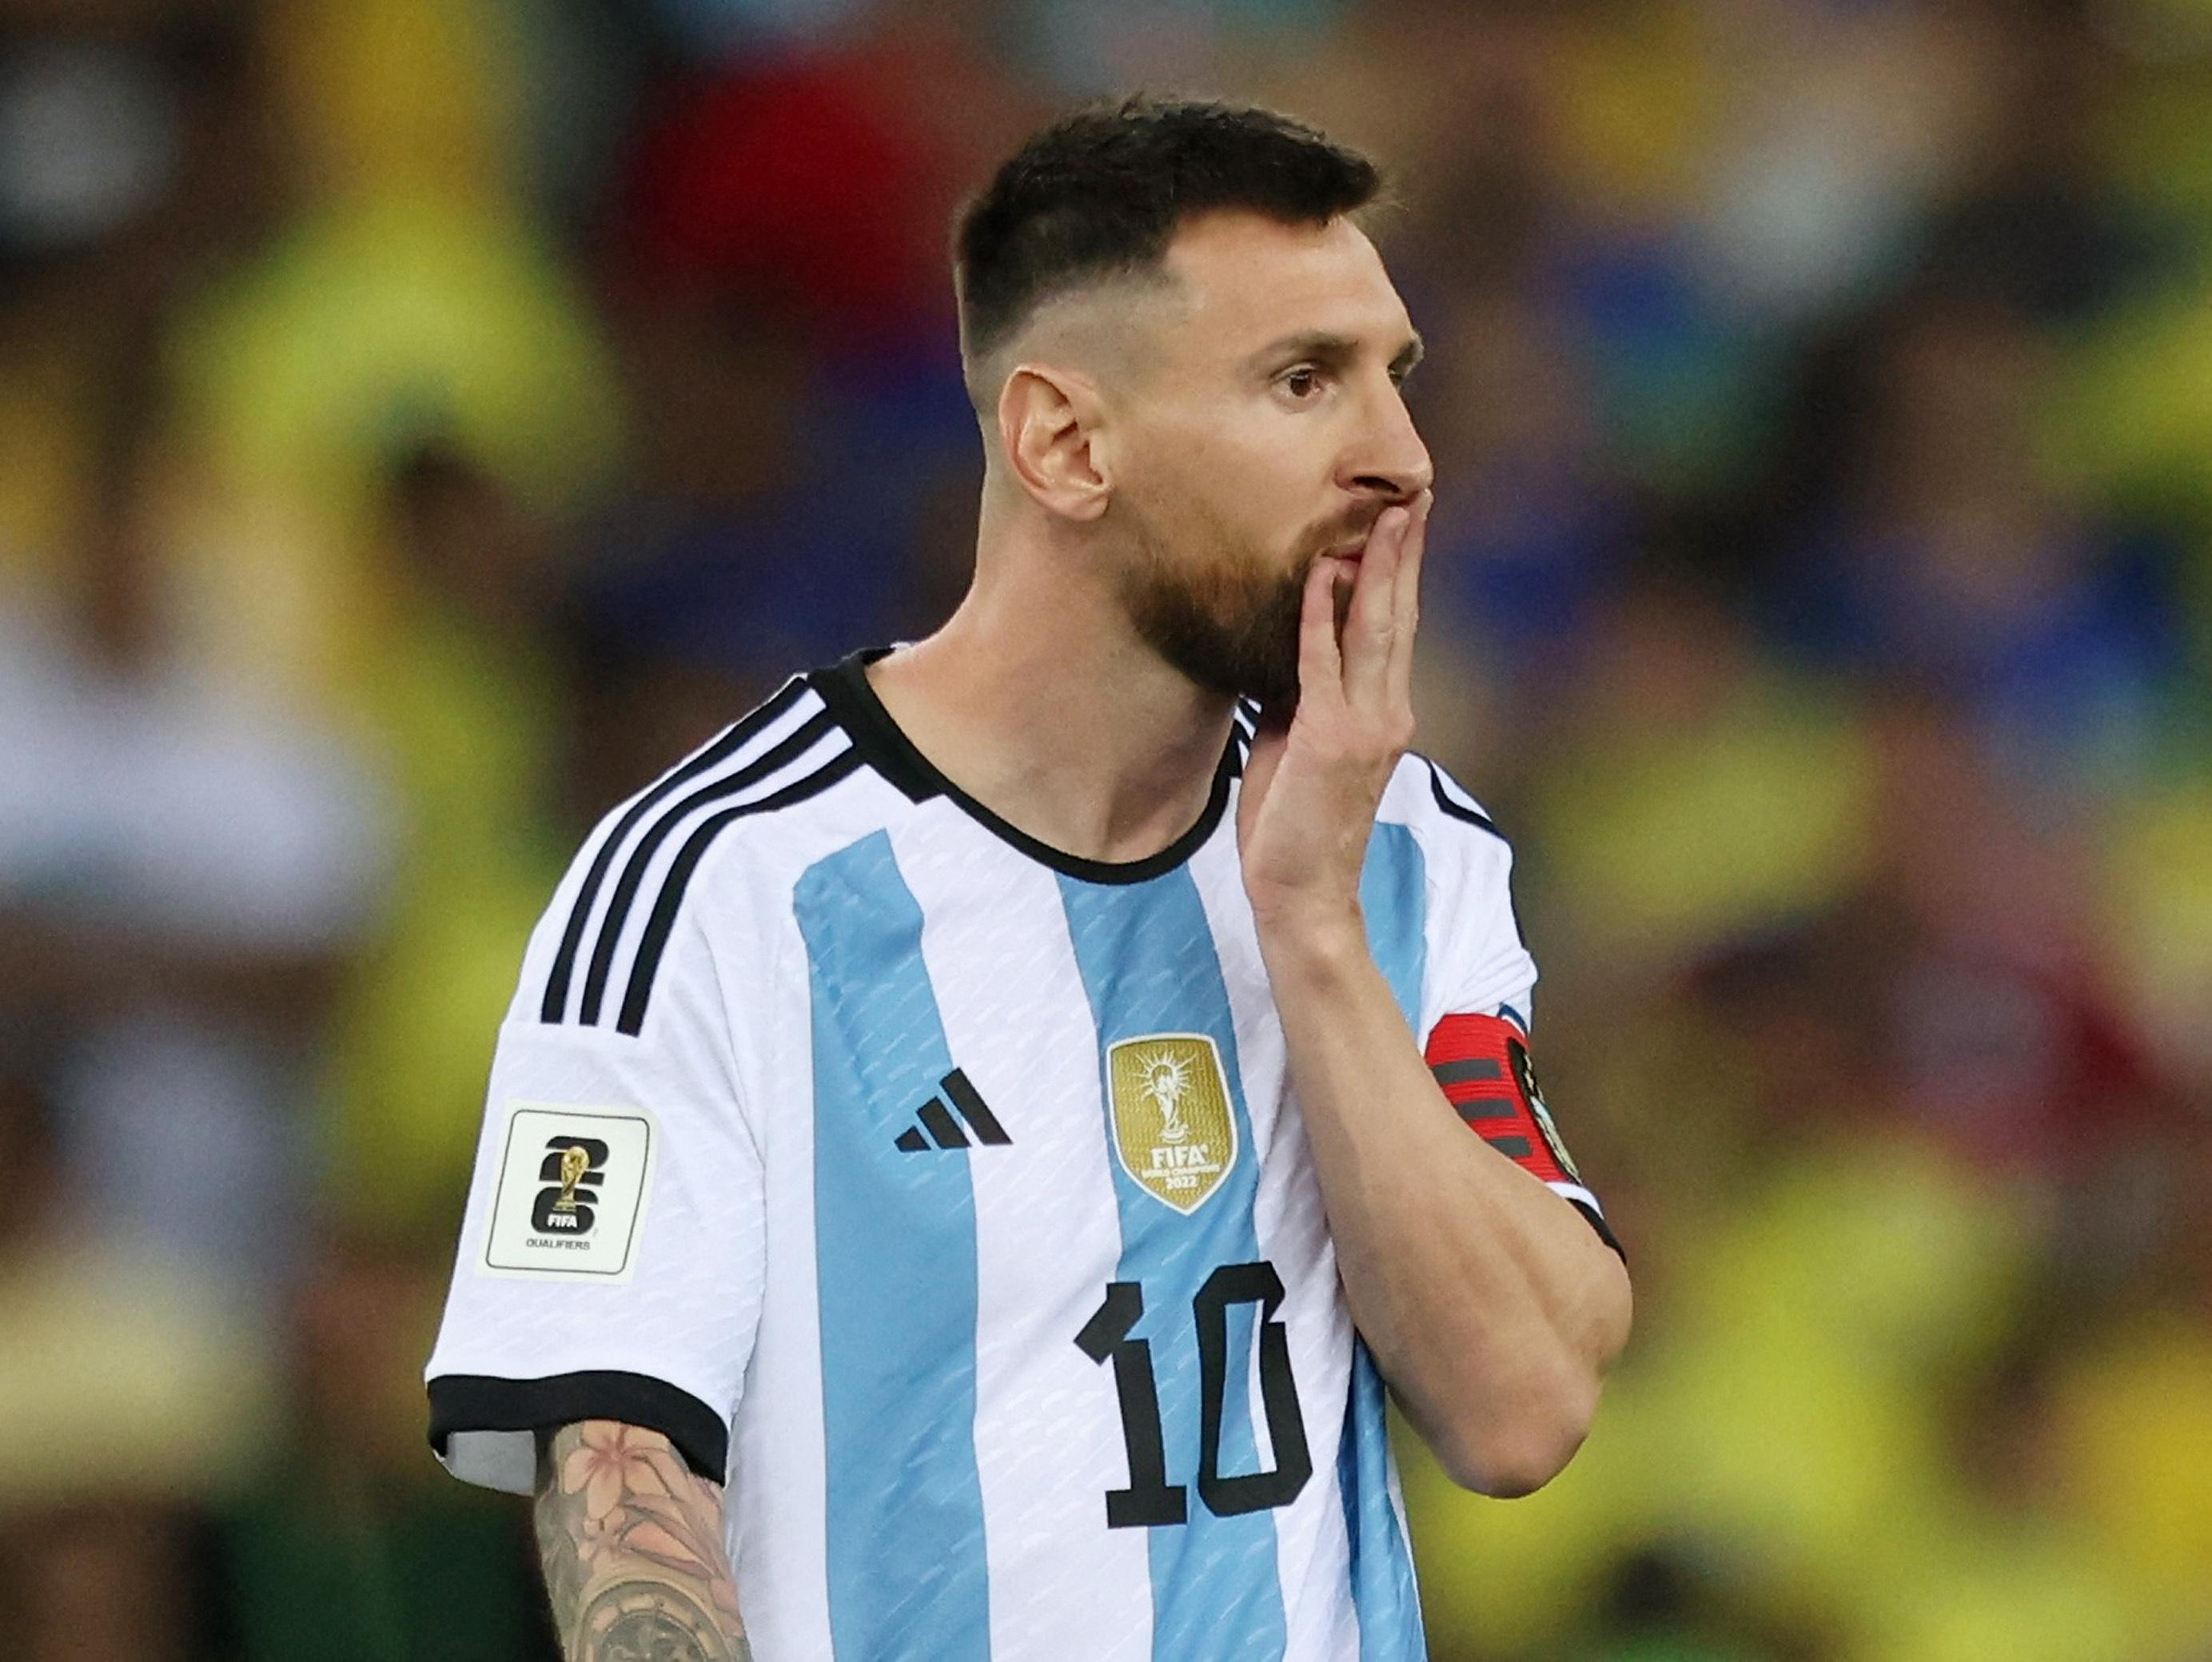 Football: Saudi Arabia “is a destination that attracted me”, admits Messi